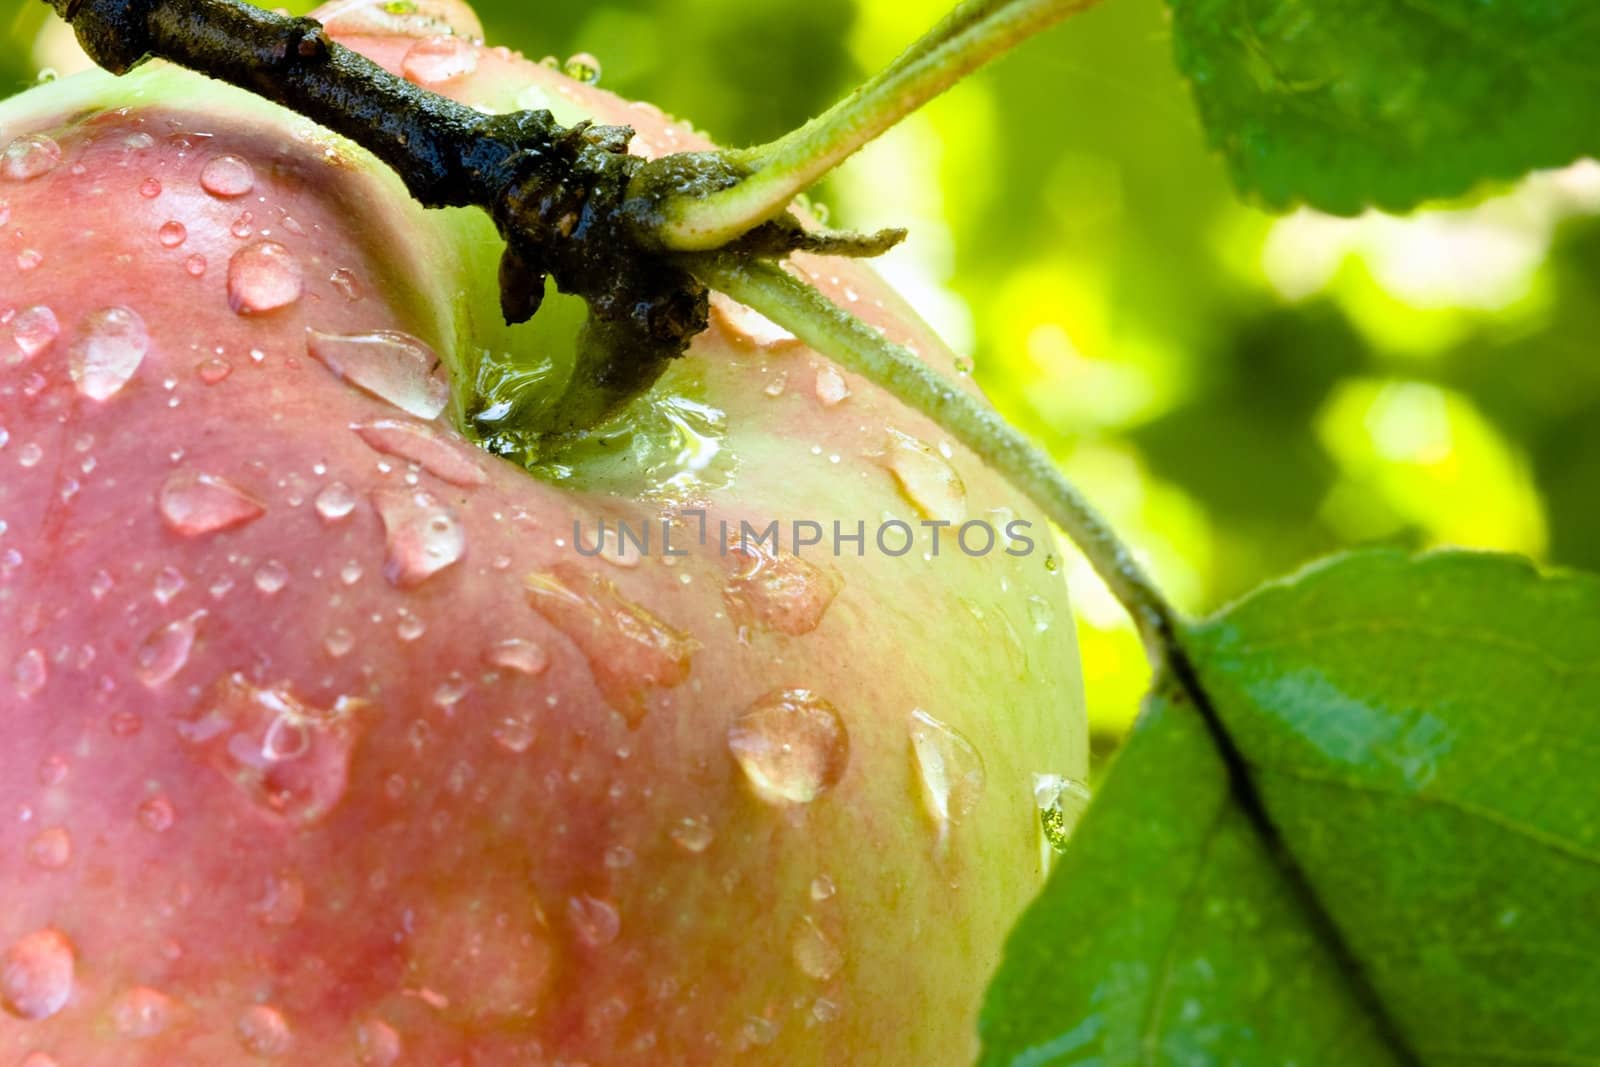 Juicy red - green apple in drops of dew on a shank with leaves